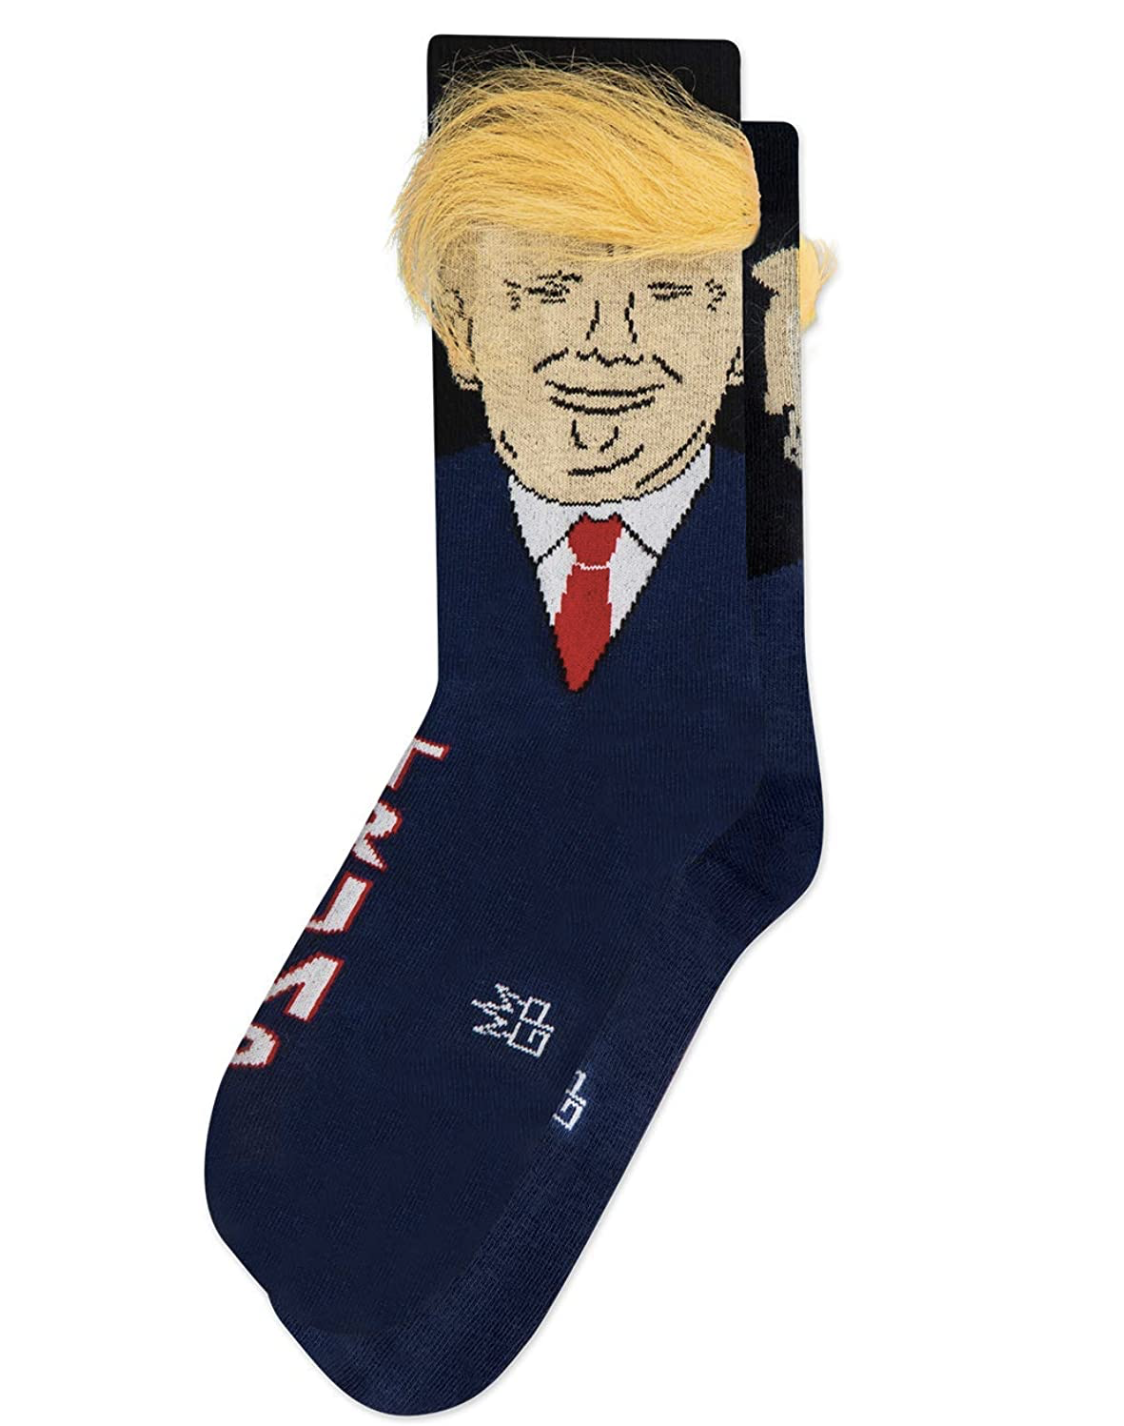 The Original Donald Trump Hair Socks | Made in the USA by Gumball Poodle | Funny Donald Trump Hair Socks Novelty Gift